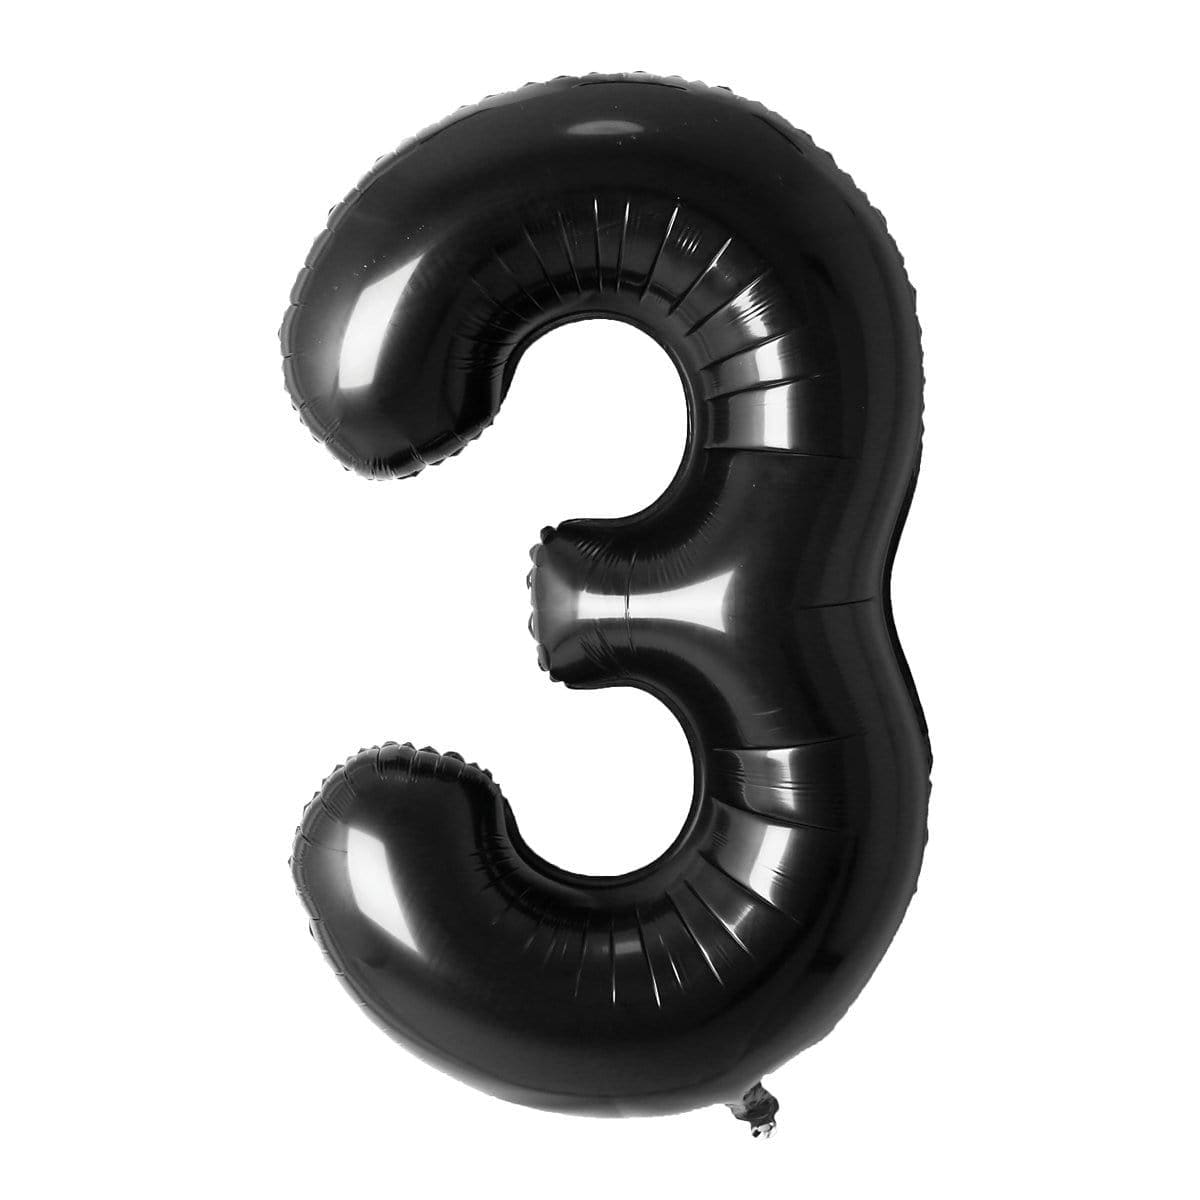 Buy Balloons Black Number 3 Foil Balloon, 34 Inches sold at Party Expert